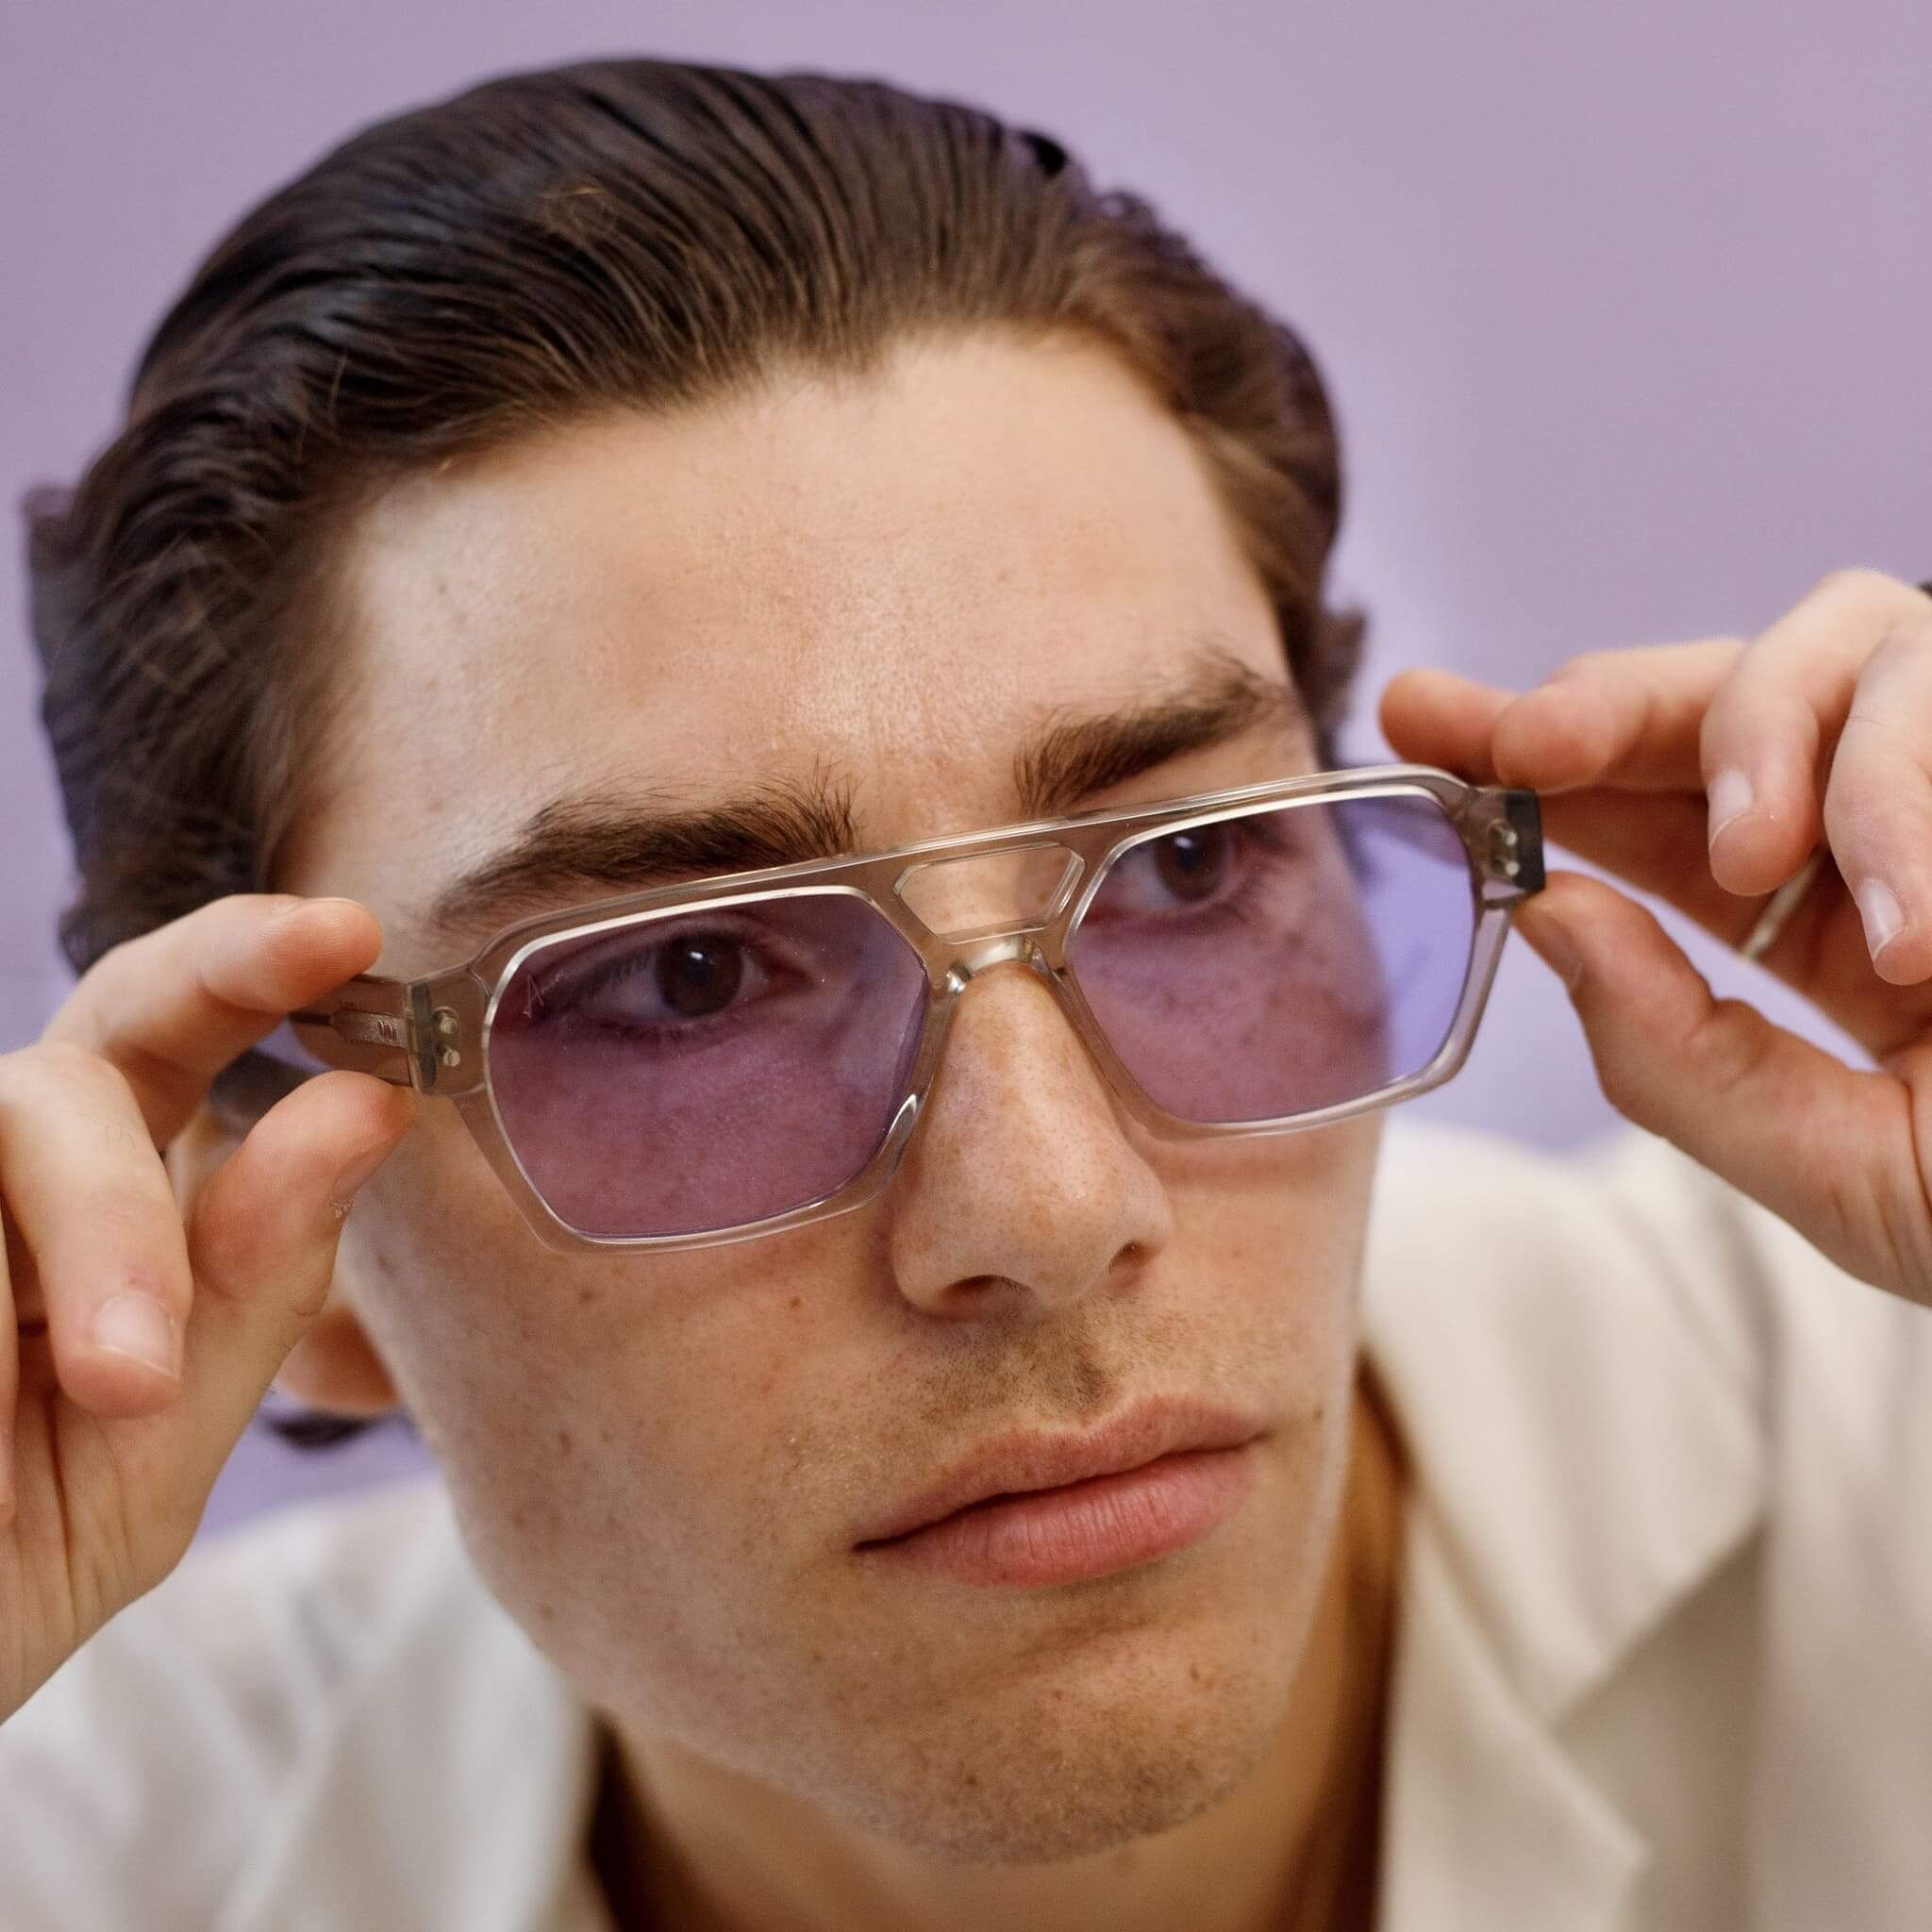 Male model in Ego sunglasses transparent grey and light purple from Ameos